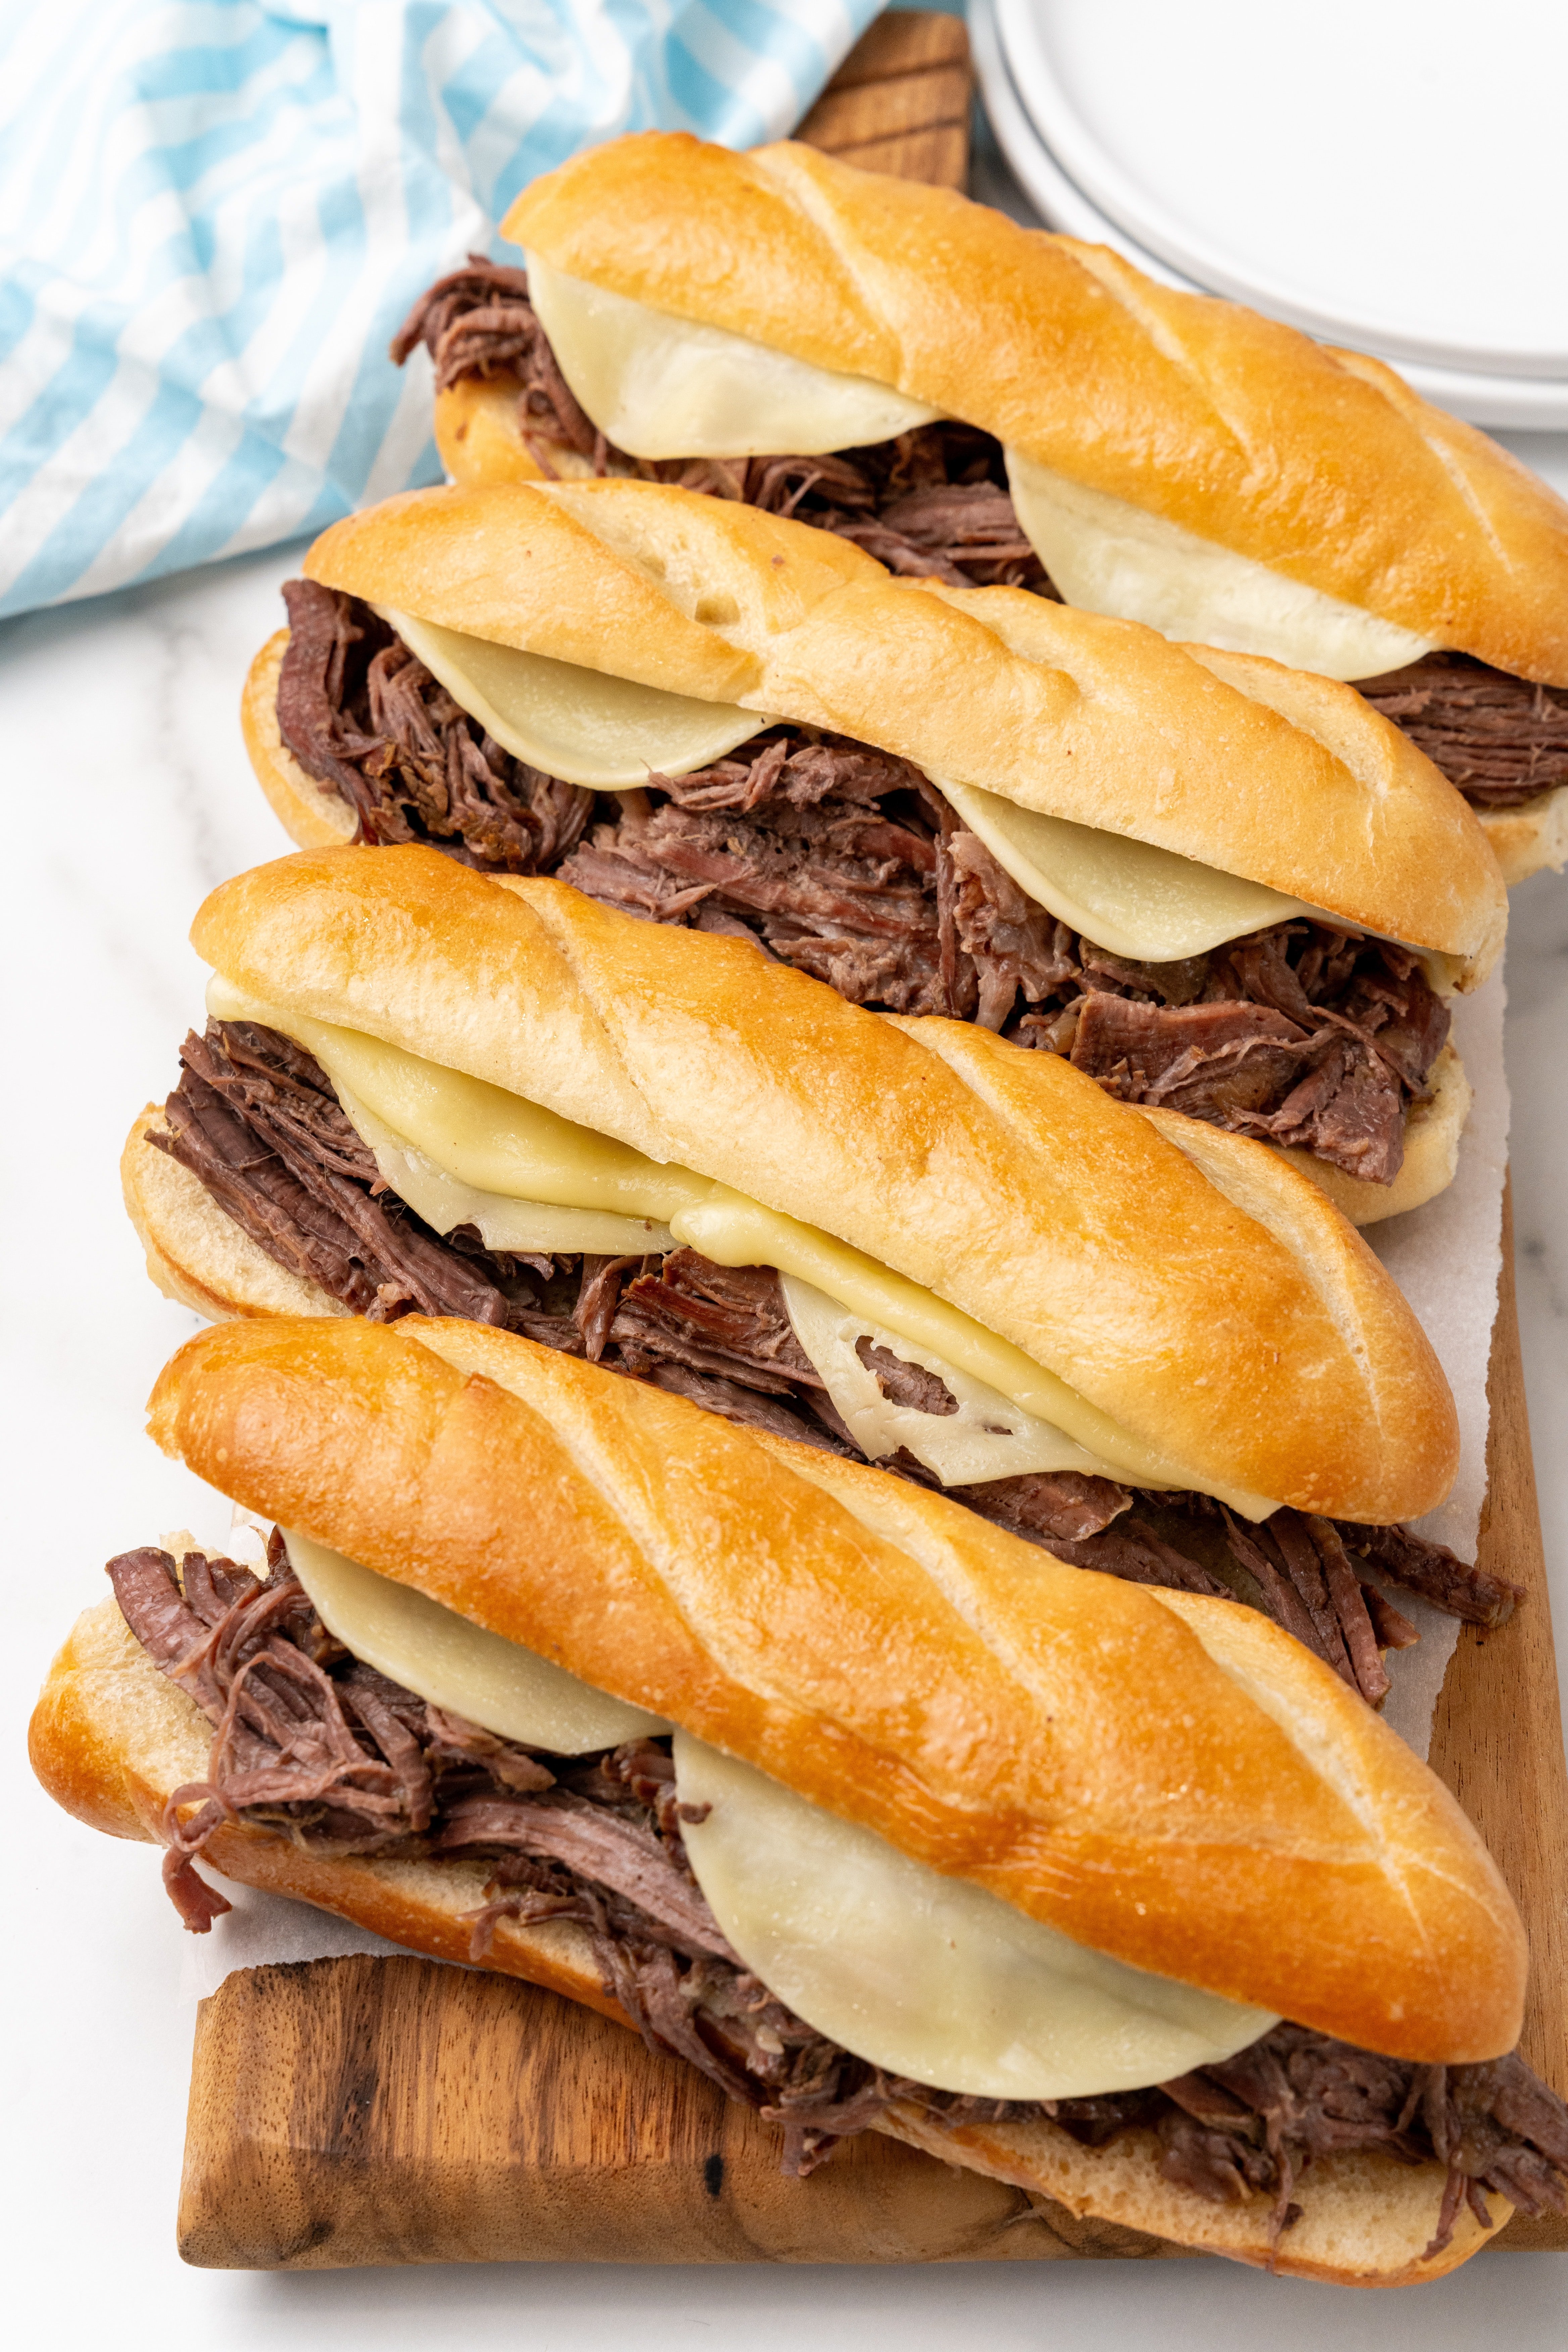 a row of crockpot french dip sandwiches on a wooden cutting board